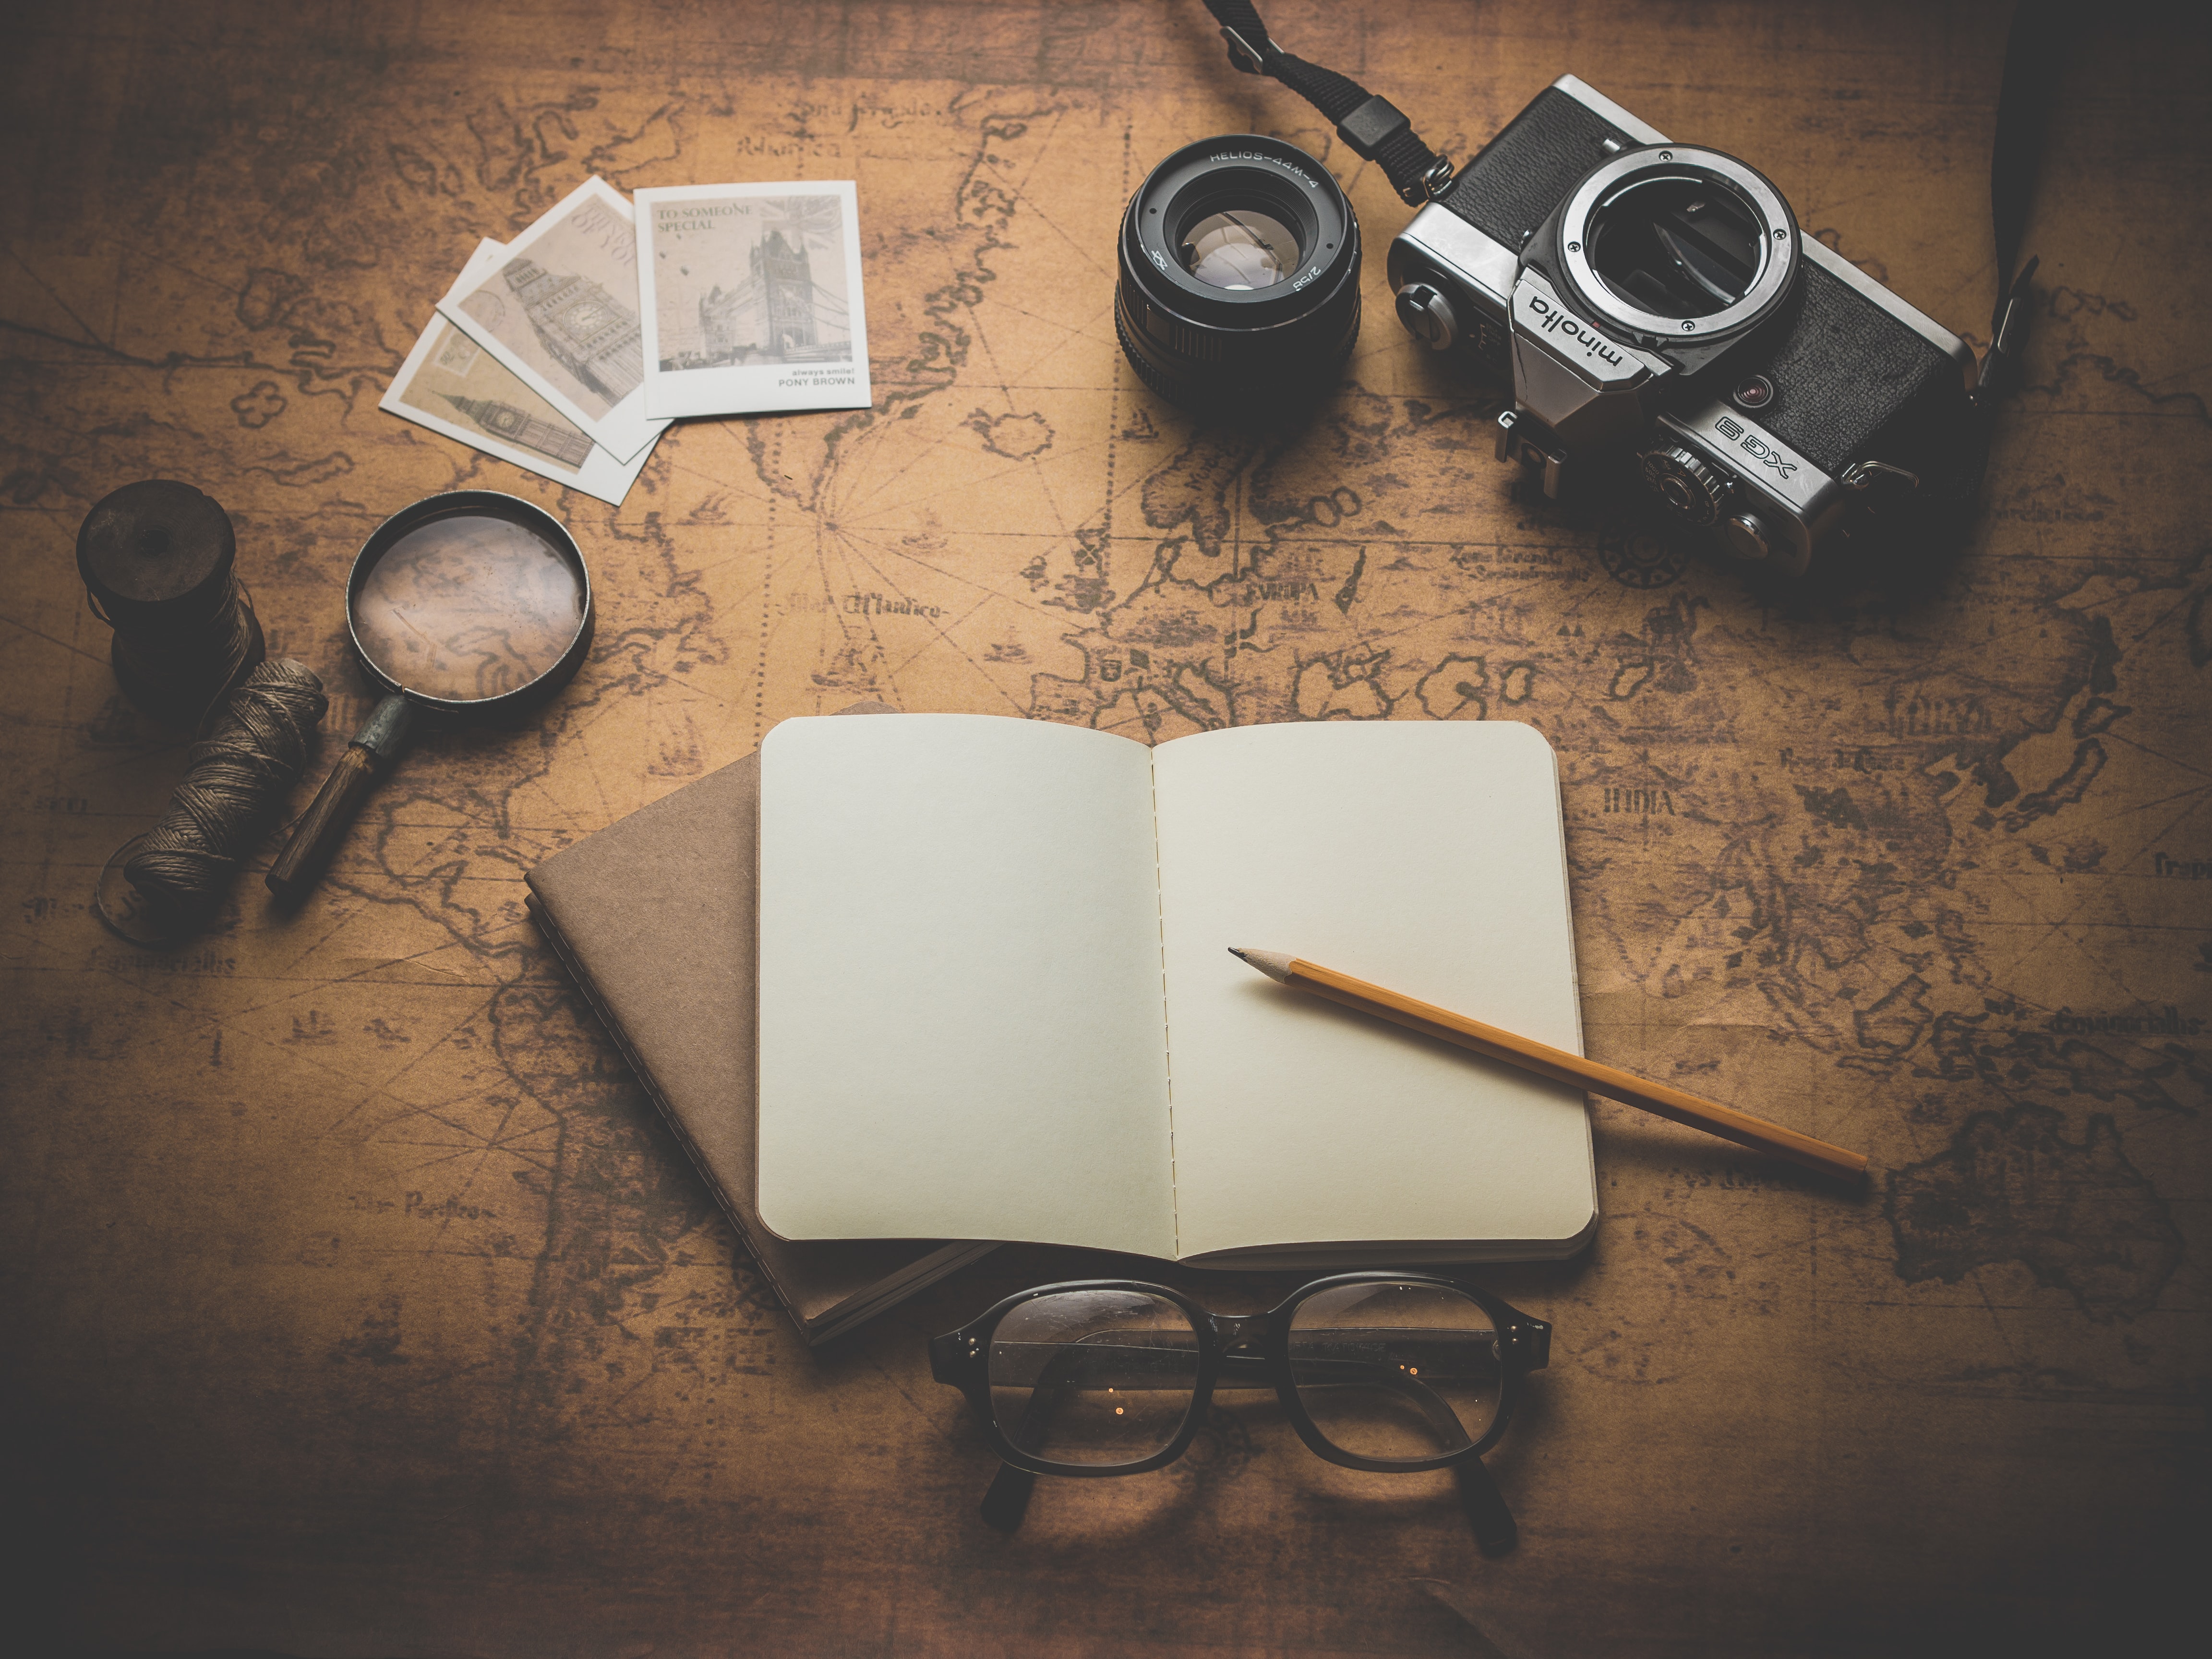 A notebook and pencil on a map, surrounded by a magnifying glass and a camera